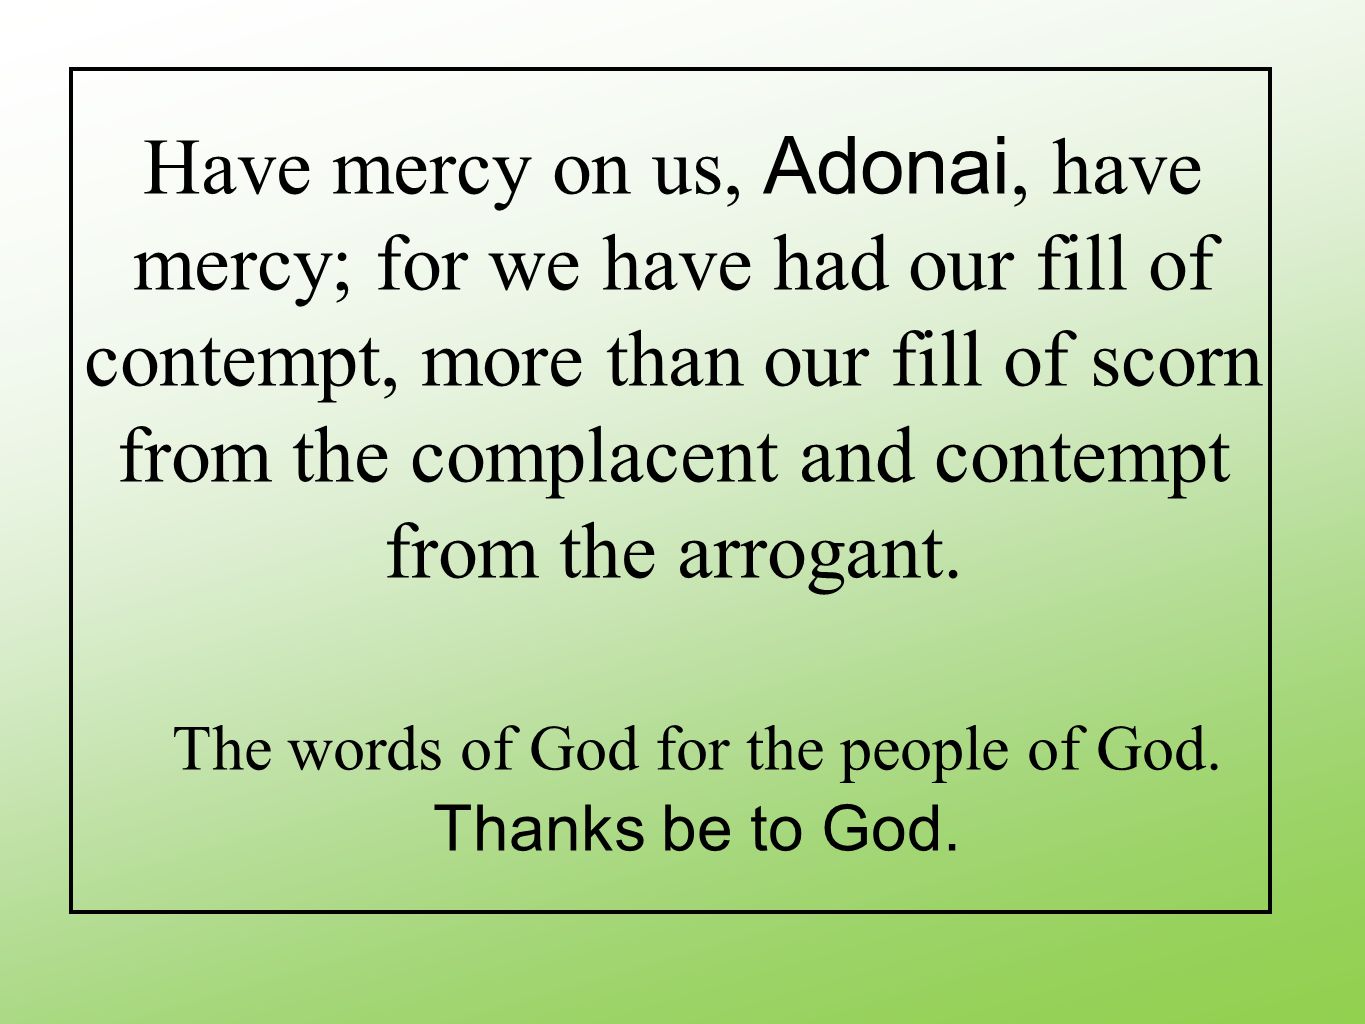 Have mercy on us, Adonai, have mercy; for we have had our fill of contempt, more than our fill of scorn from the complacent and contempt from the arrogant.